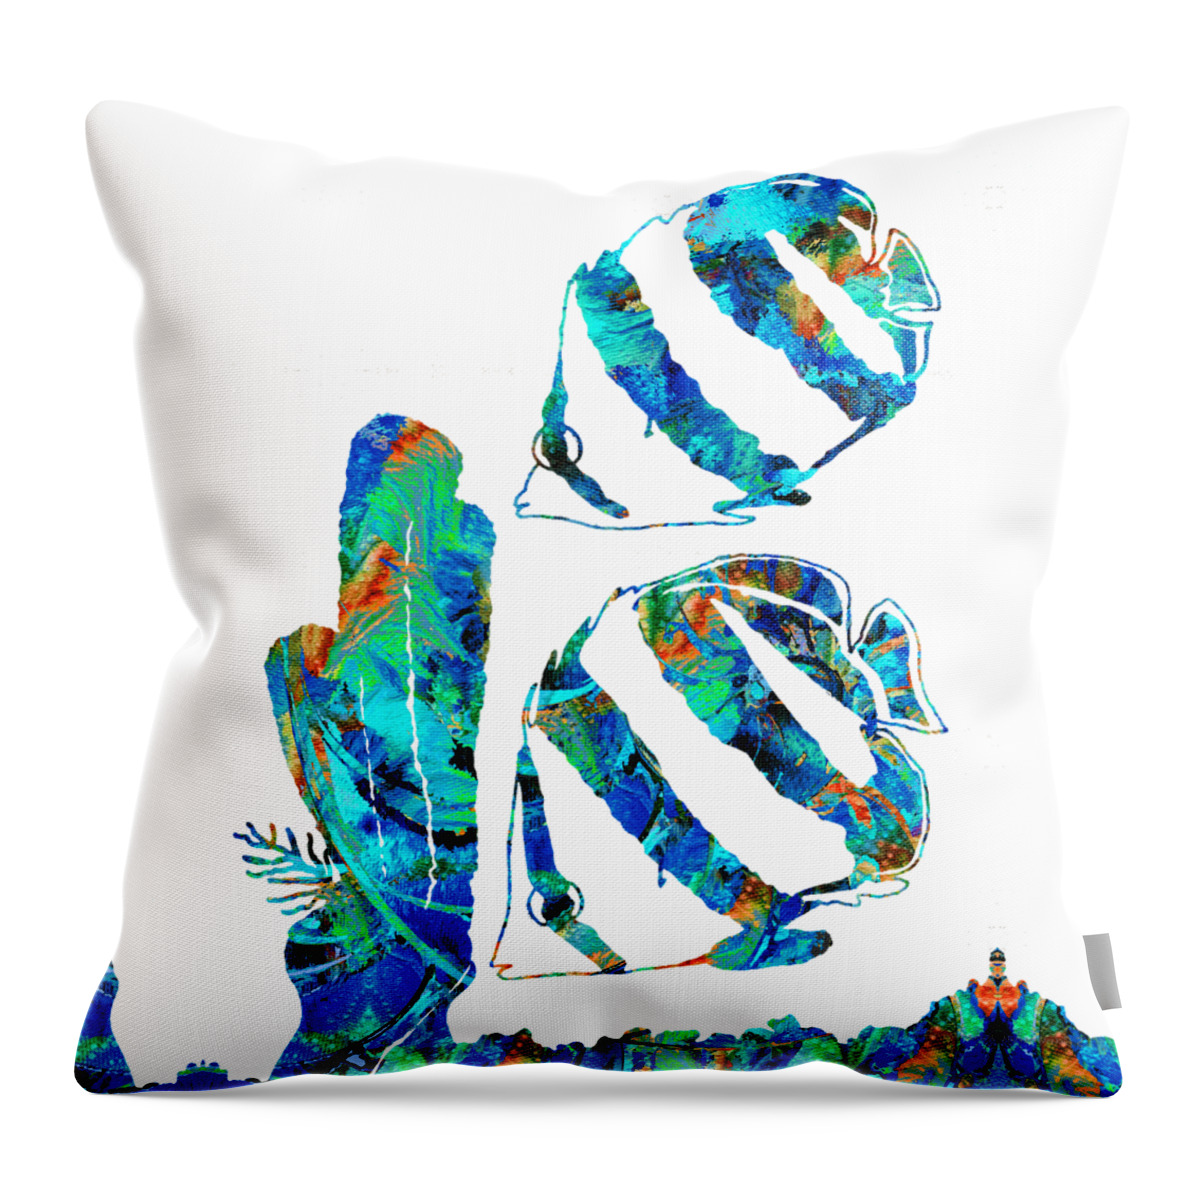 Angel Fish Throw Pillow featuring the painting Blue Angels Fish Art by Sharon Cummings by Sharon Cummings